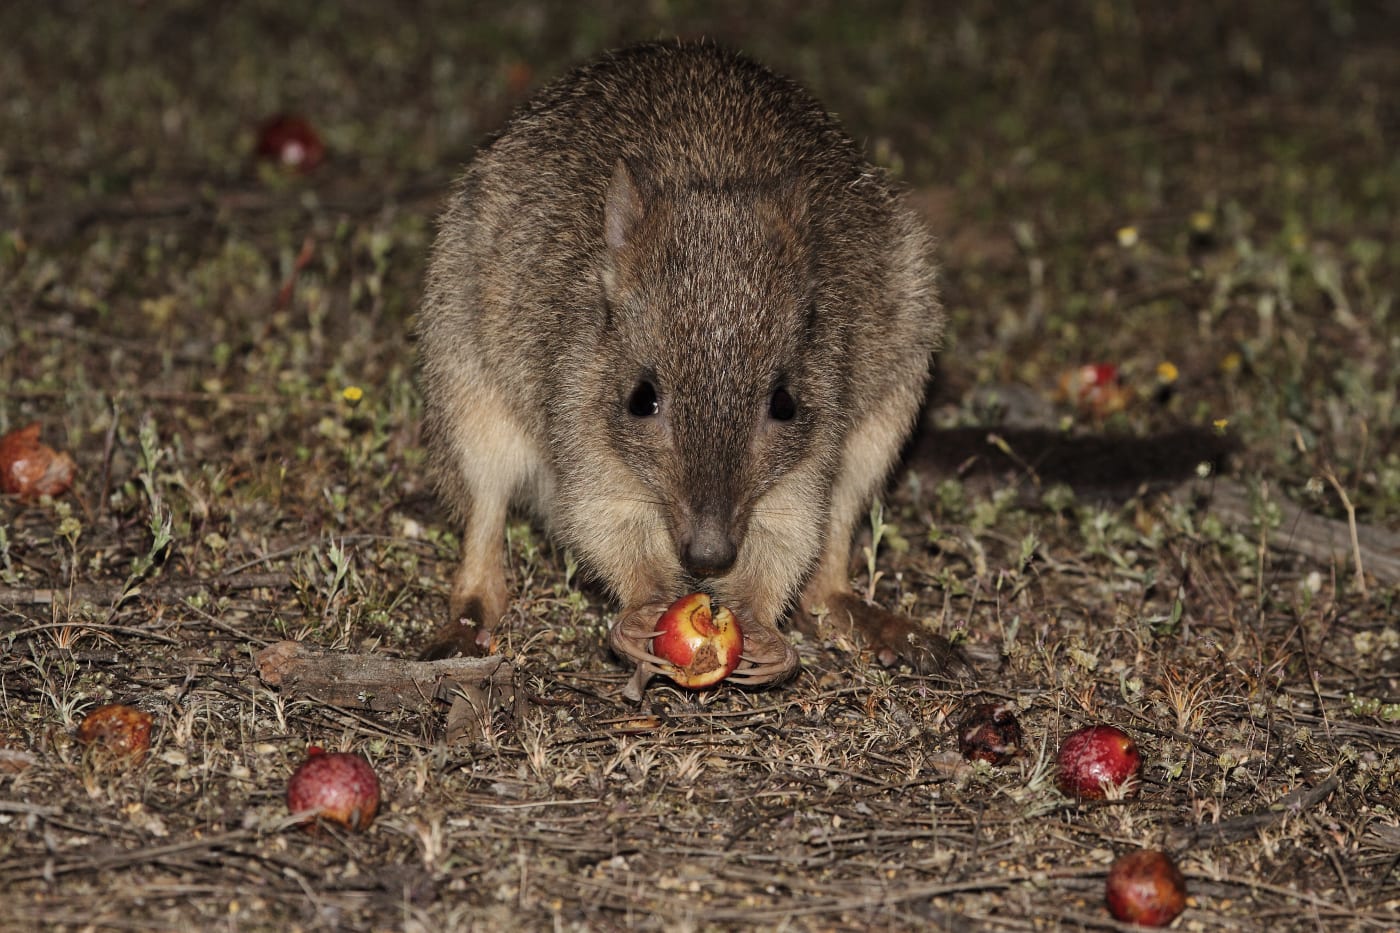 A woylie / brush-tailed bettong (Bettongia penicillata) eating a quandong in the Dryandra Woodlands, Western Australia, October 2015